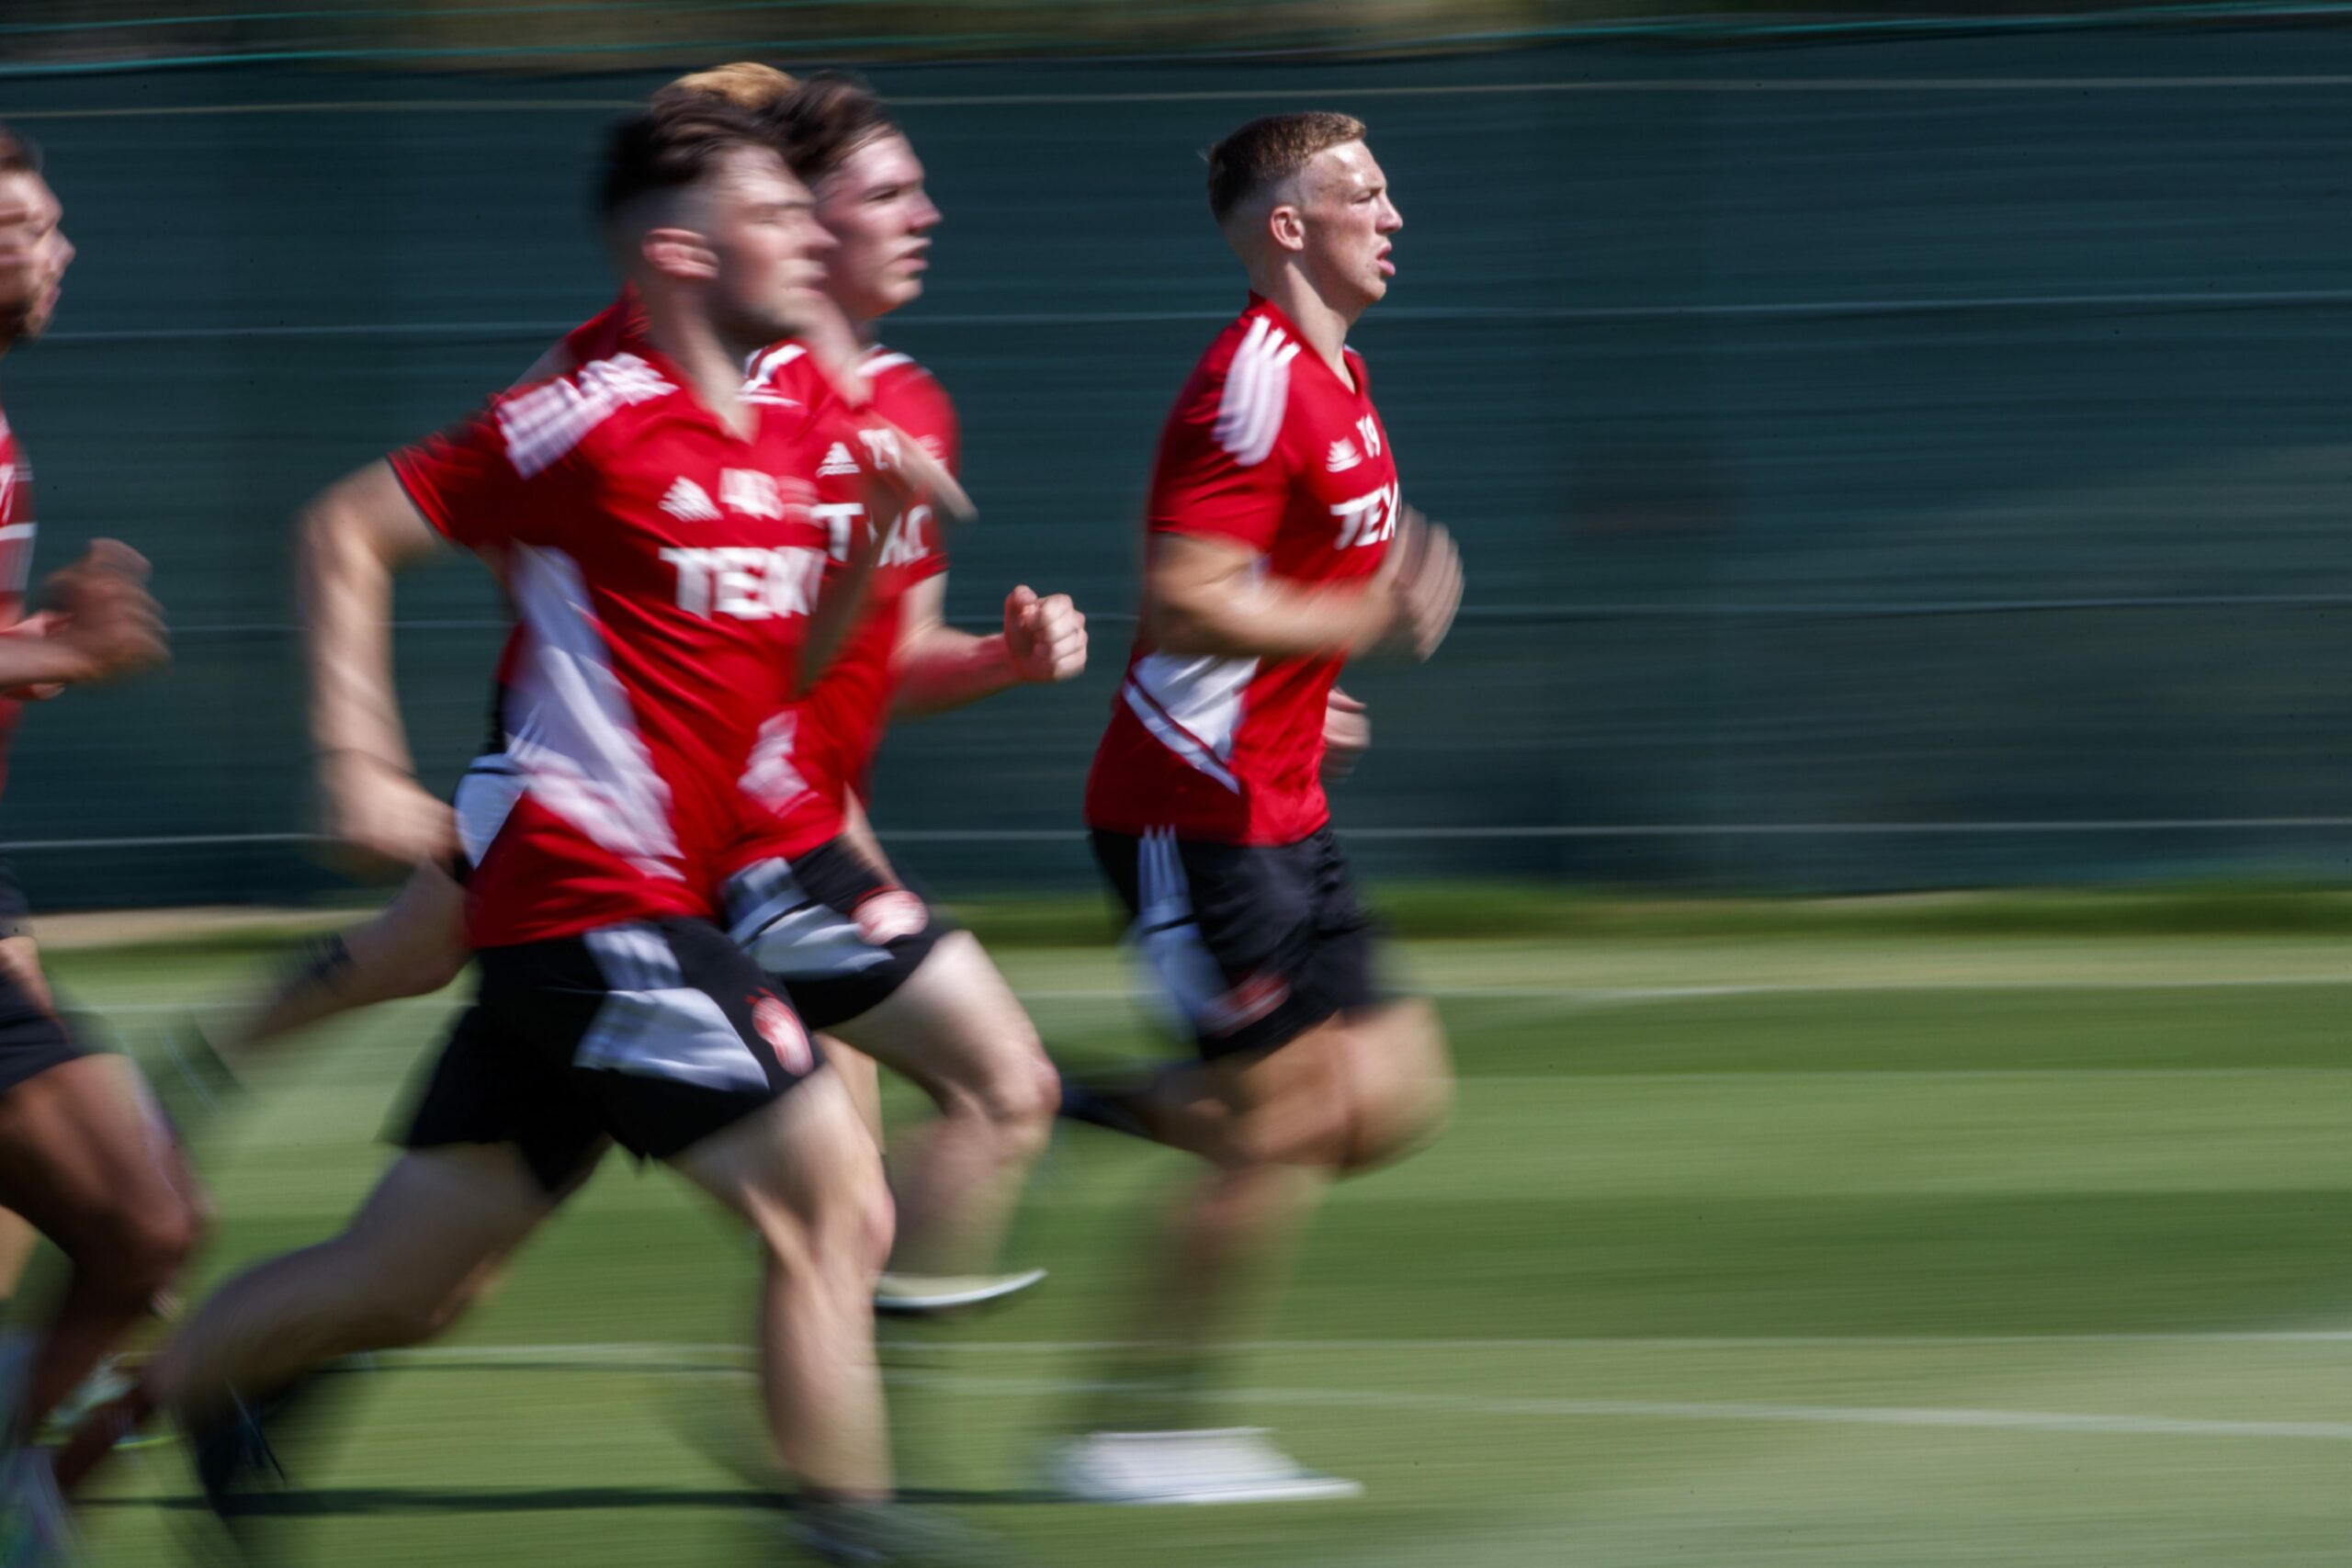 Lewis Ferguson running at a training session in Spain.